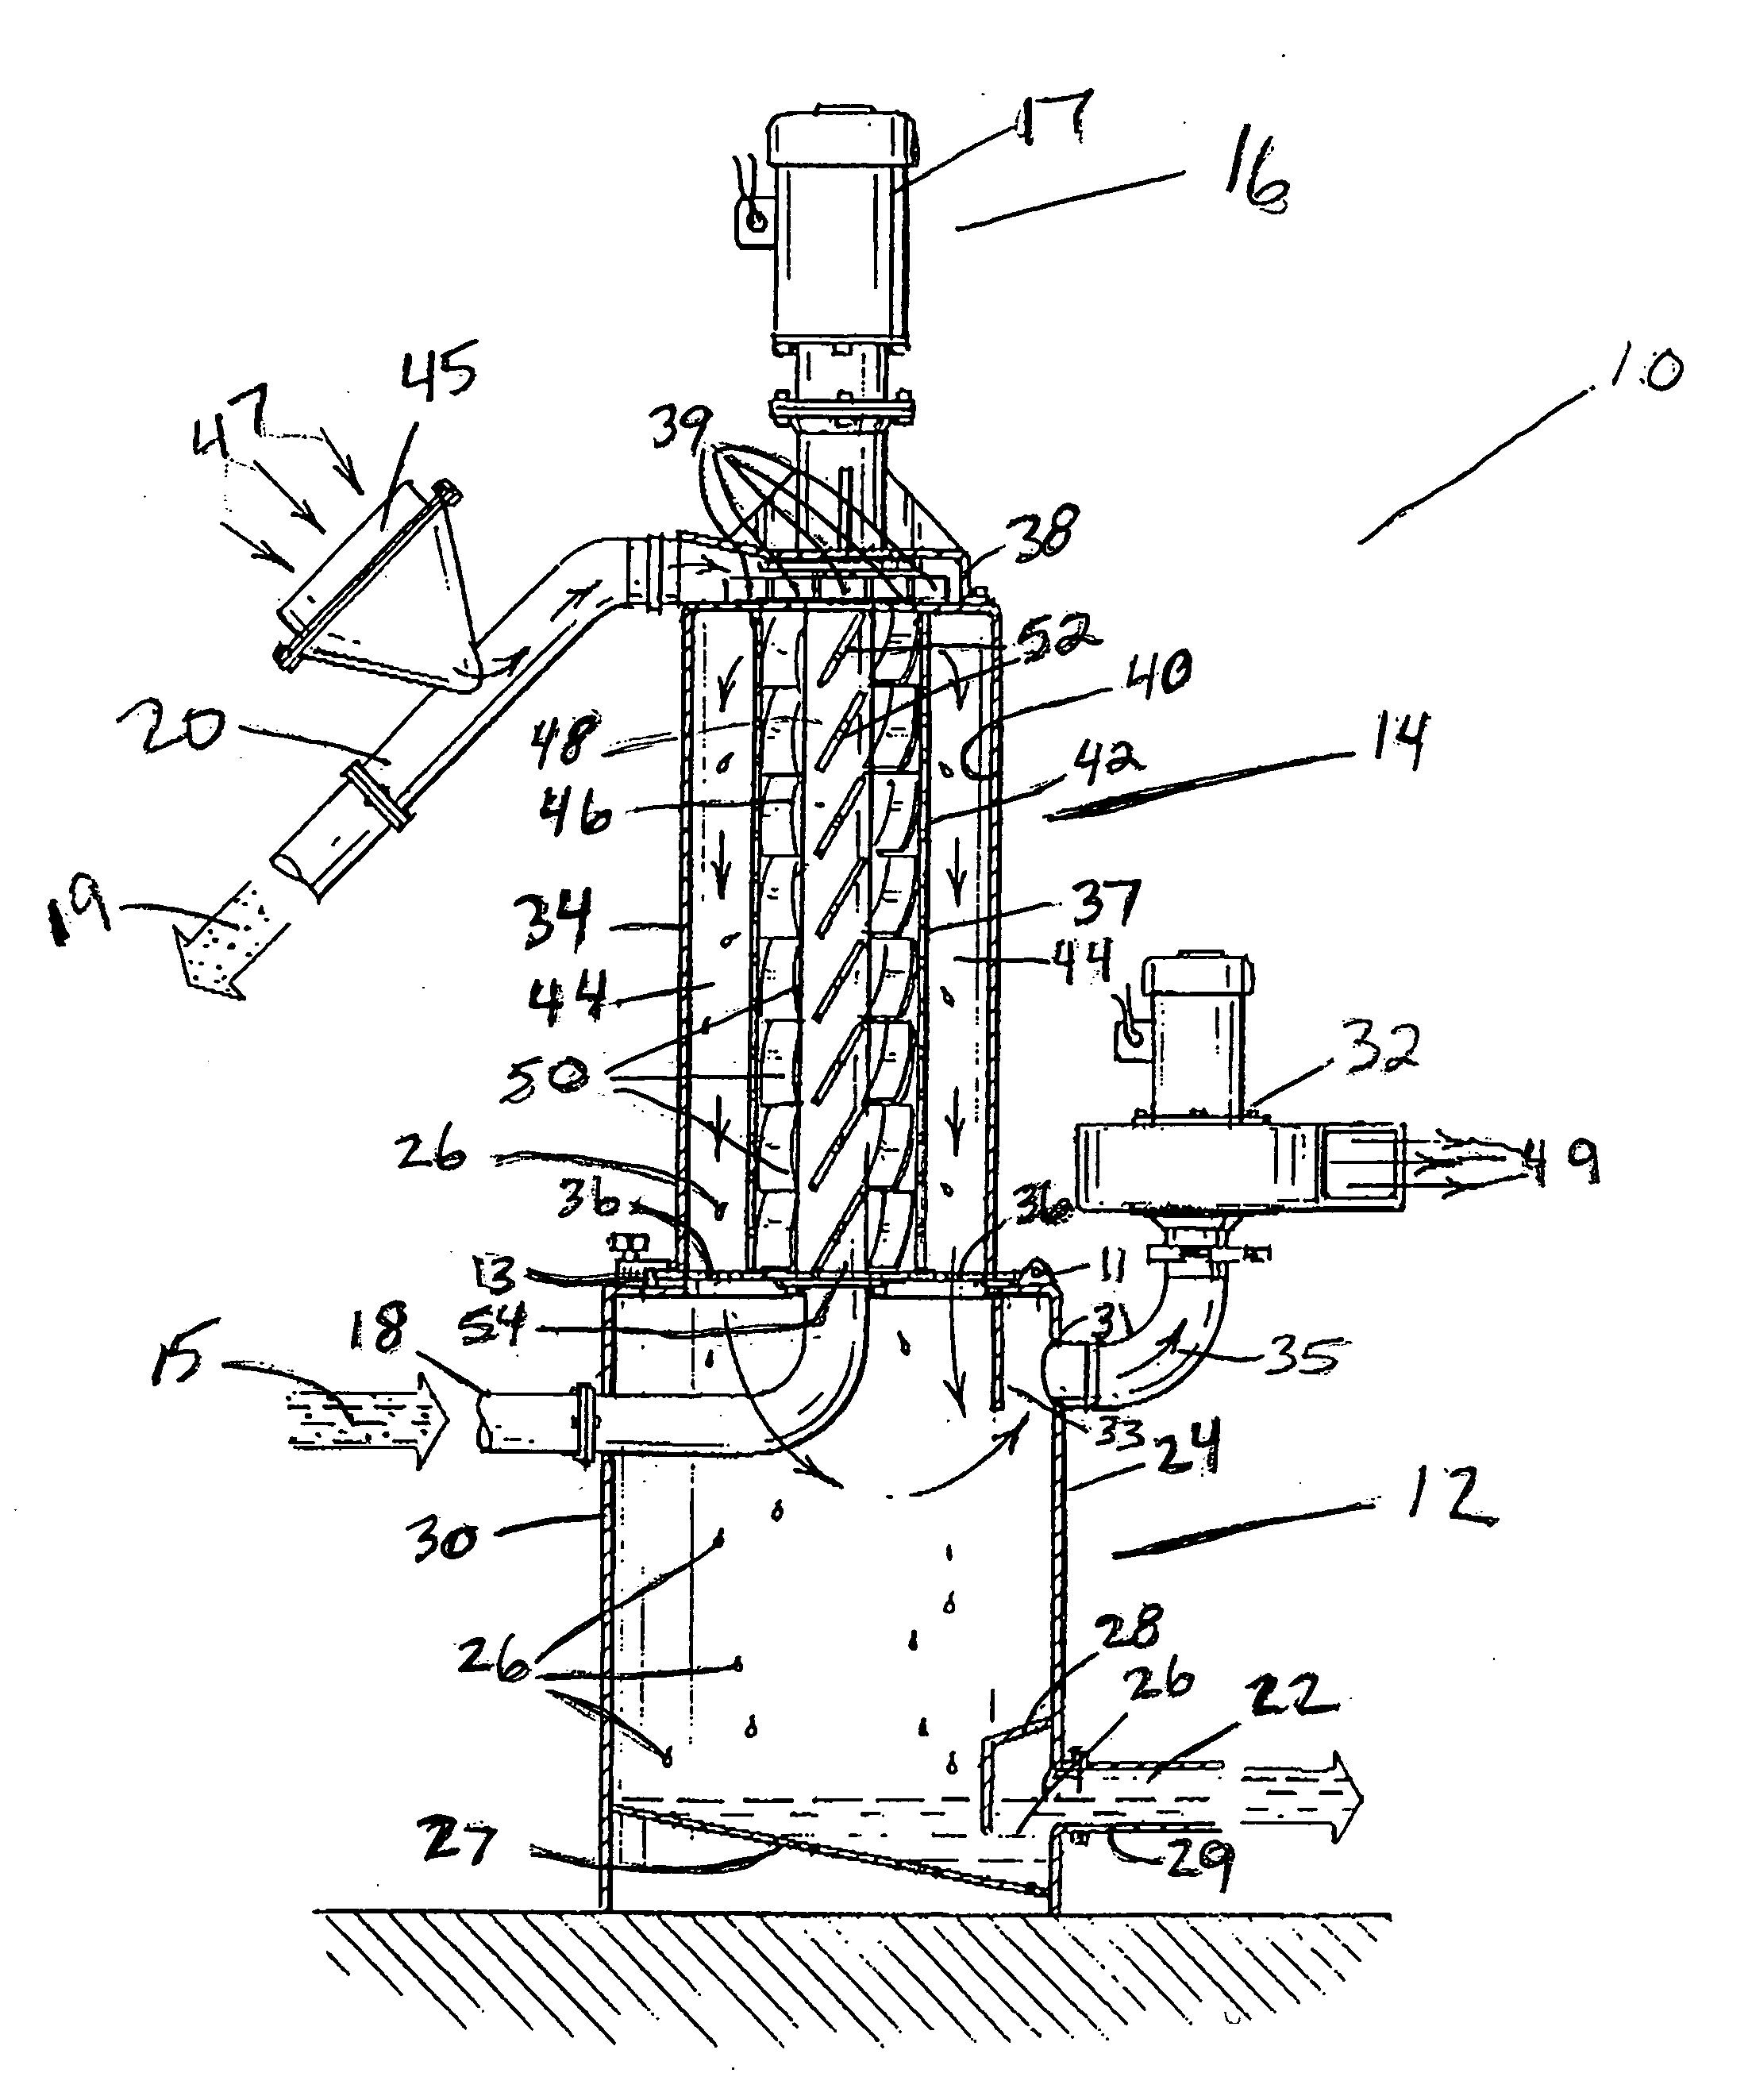 Forced air circulation for centrifugal pellet dryer